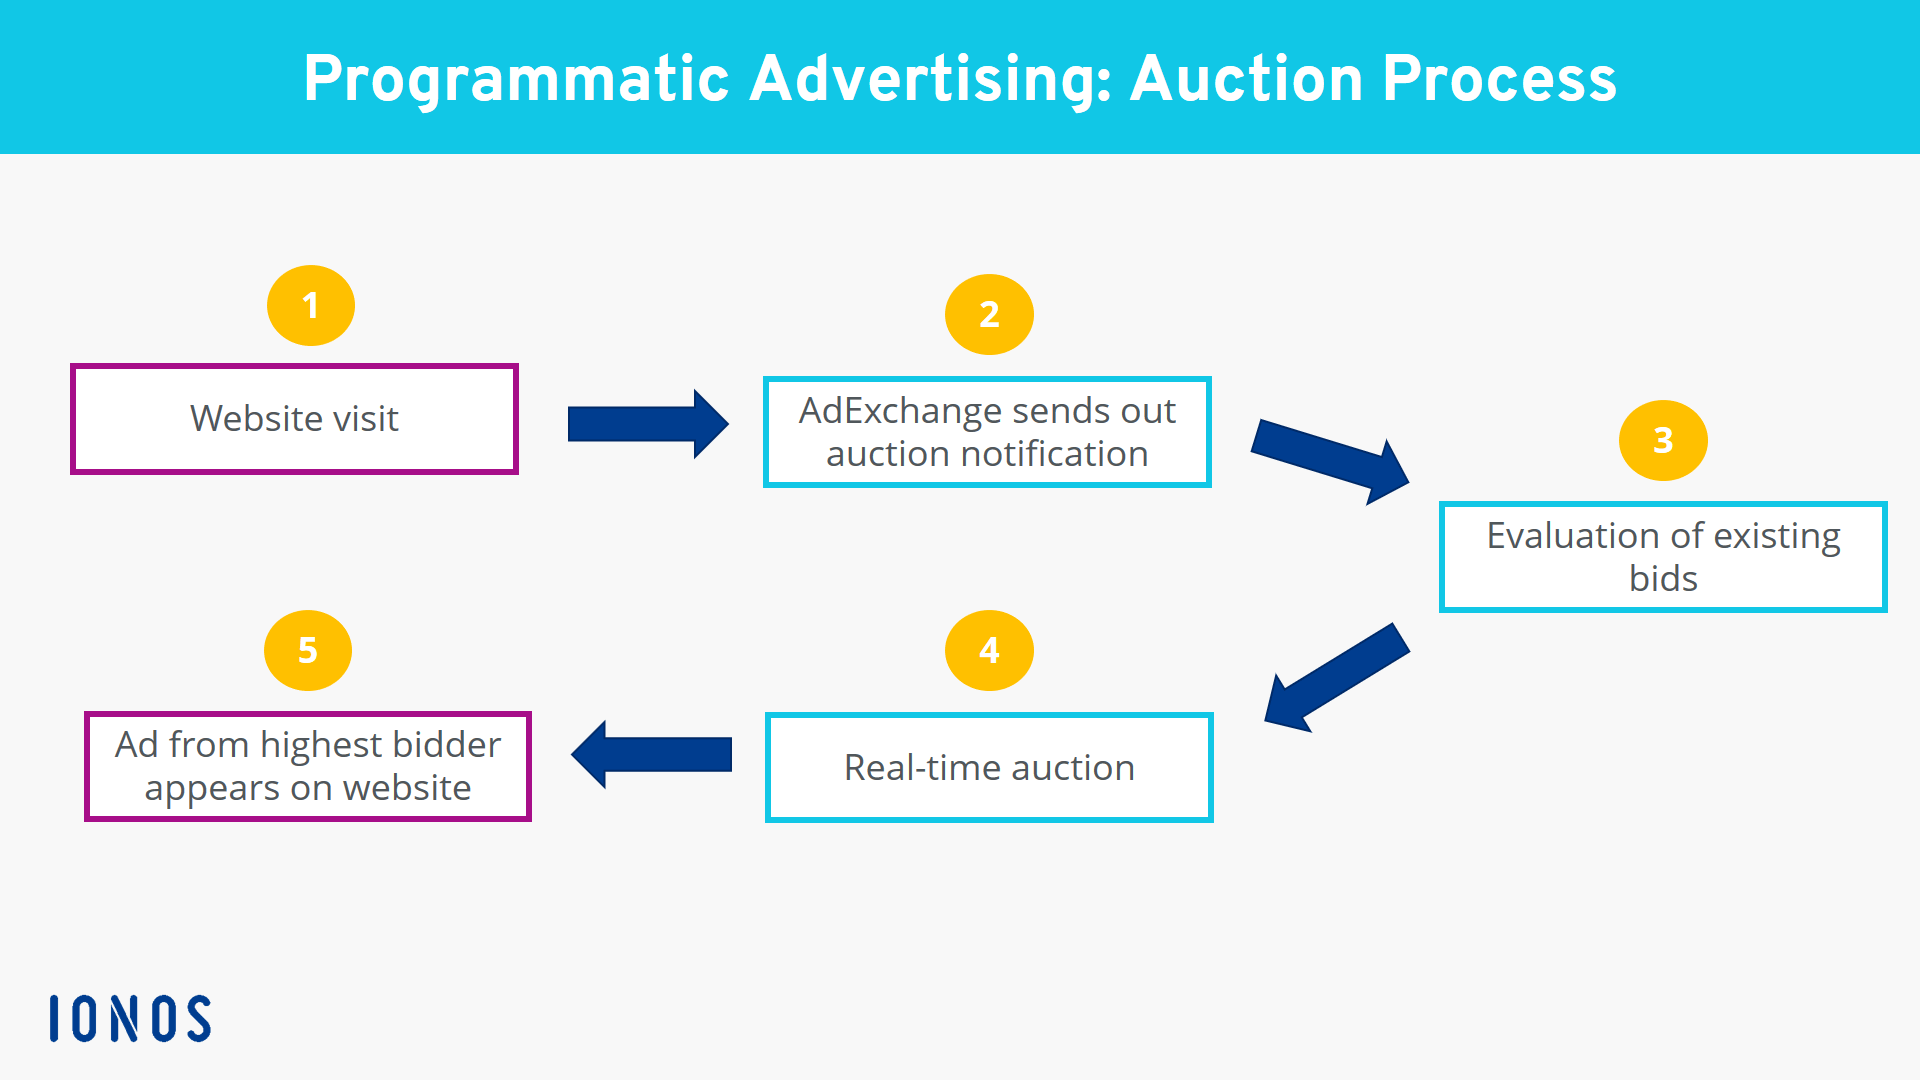 The auction process sequence in programmatic advertising